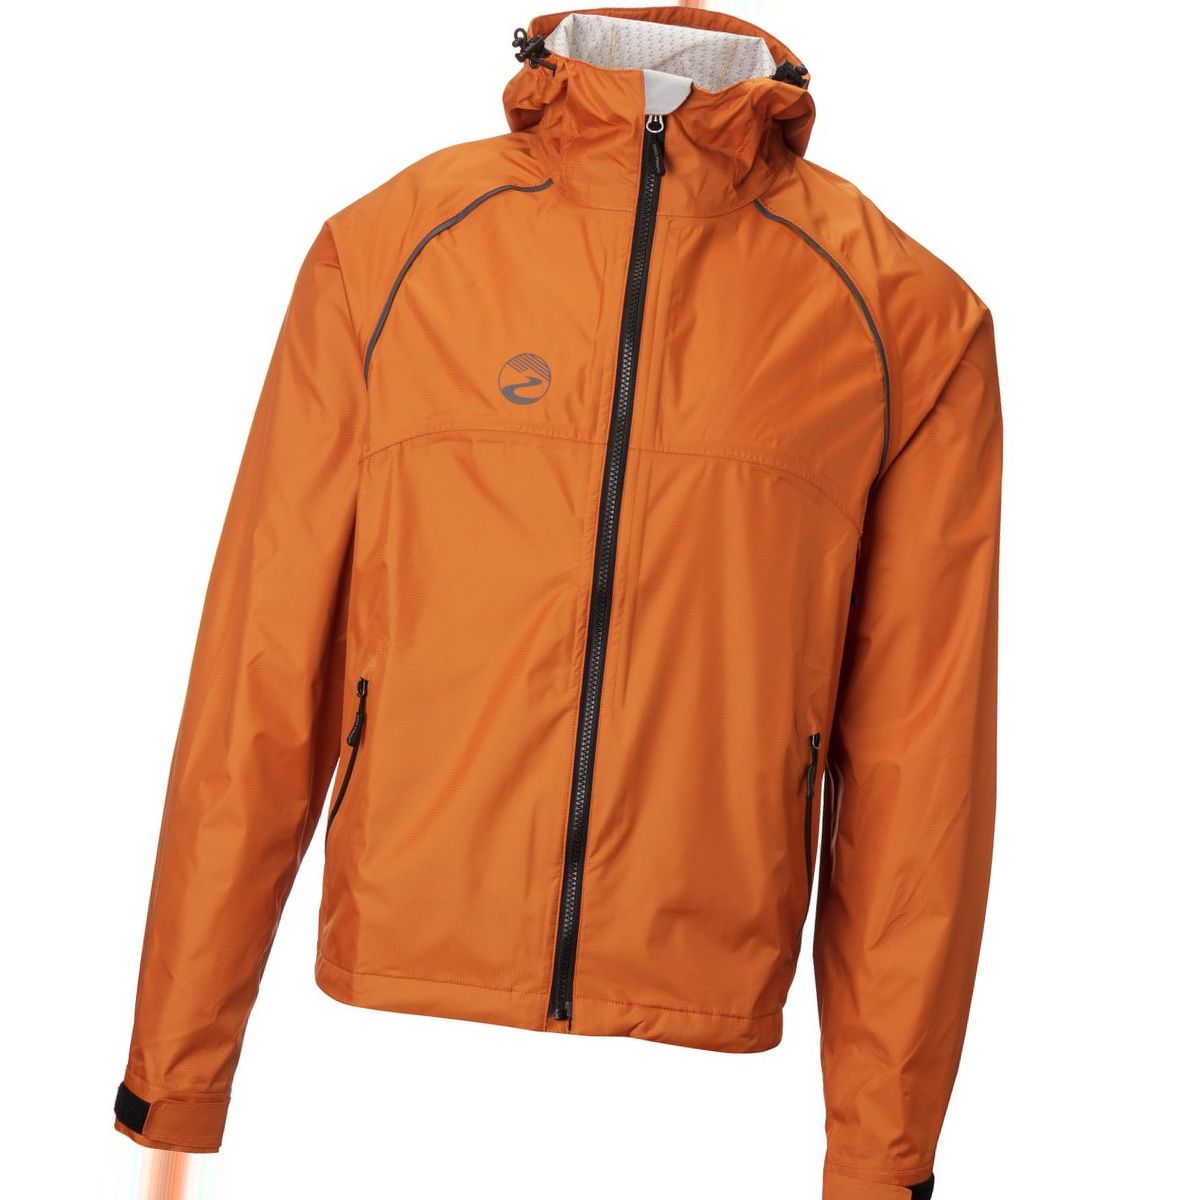 Showers Pass Syncline Jacket - Men's